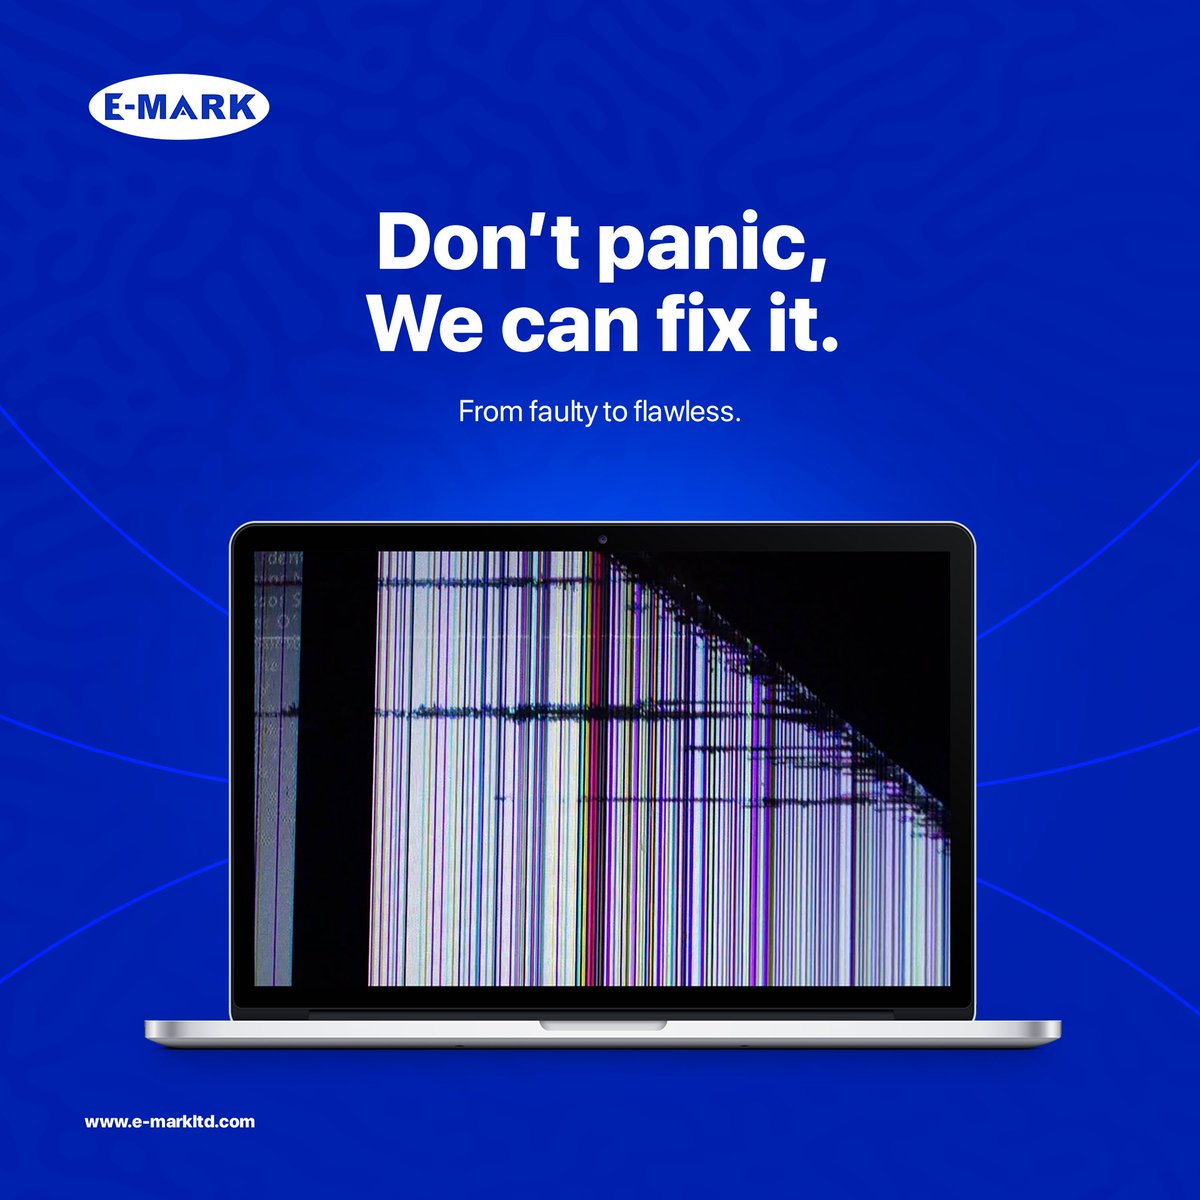 Why panic when you could easily have your device restored when you fix with us. Visit us for quick and reliable repairs. #DeviceRepair #DonotPanic #Fixwithus